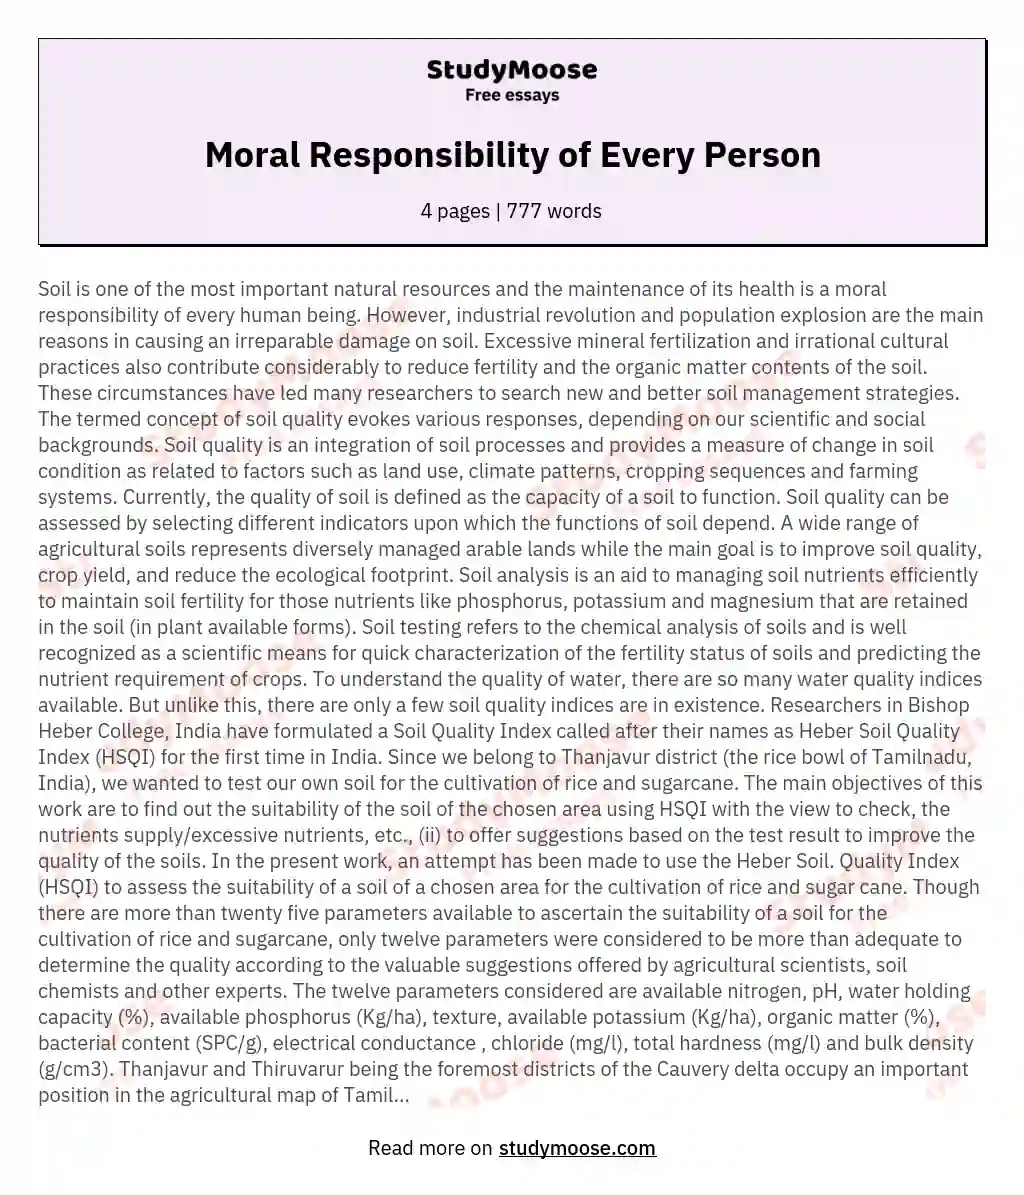 Moral Responsibility of Every Person essay